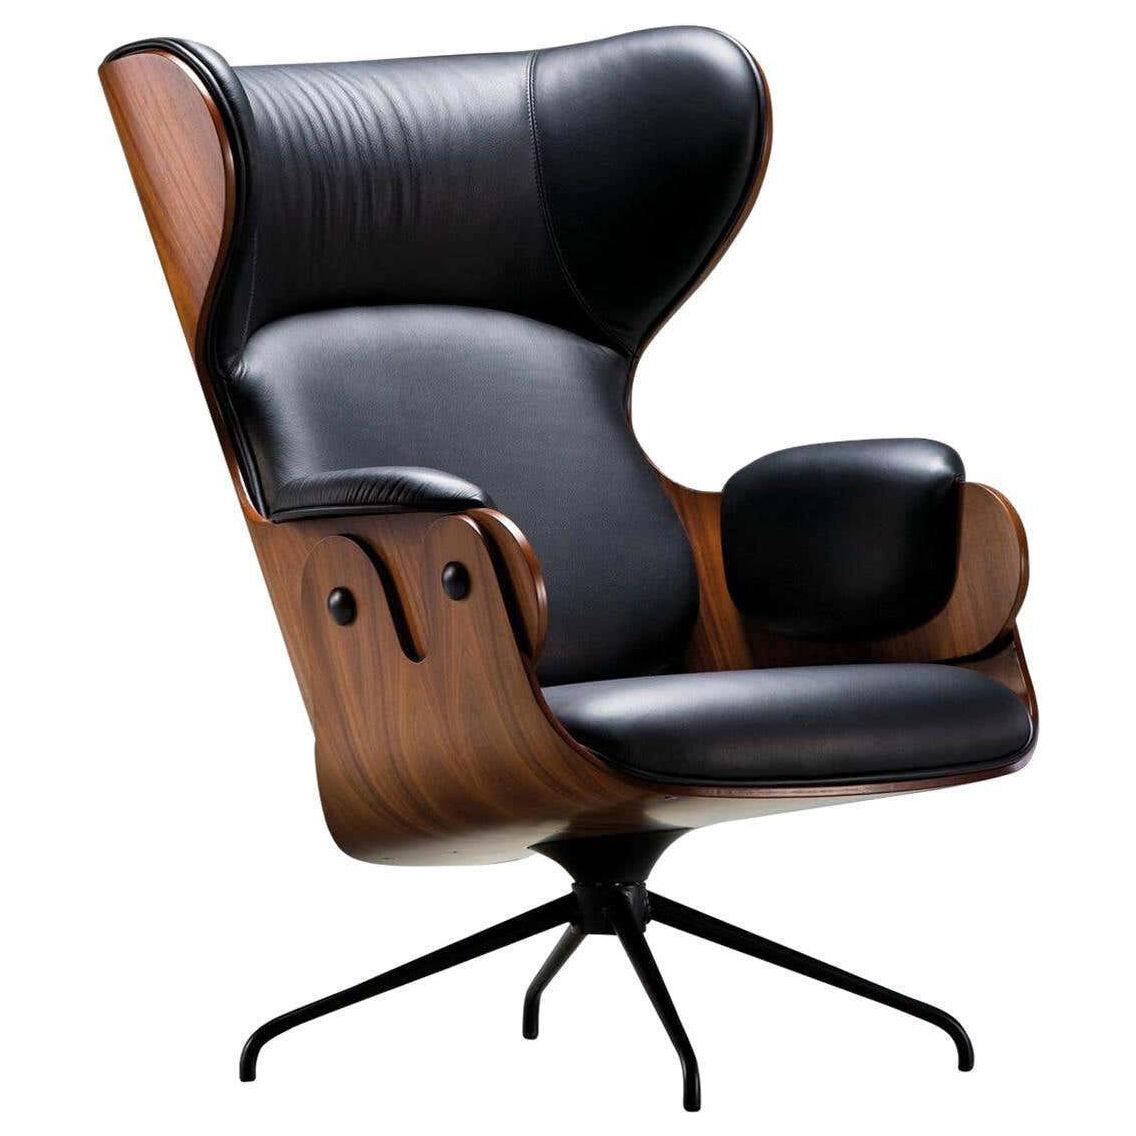 Jaime Hayon, Contemporary, Playwood Walnut Leather Upholstery Lounger Armchair